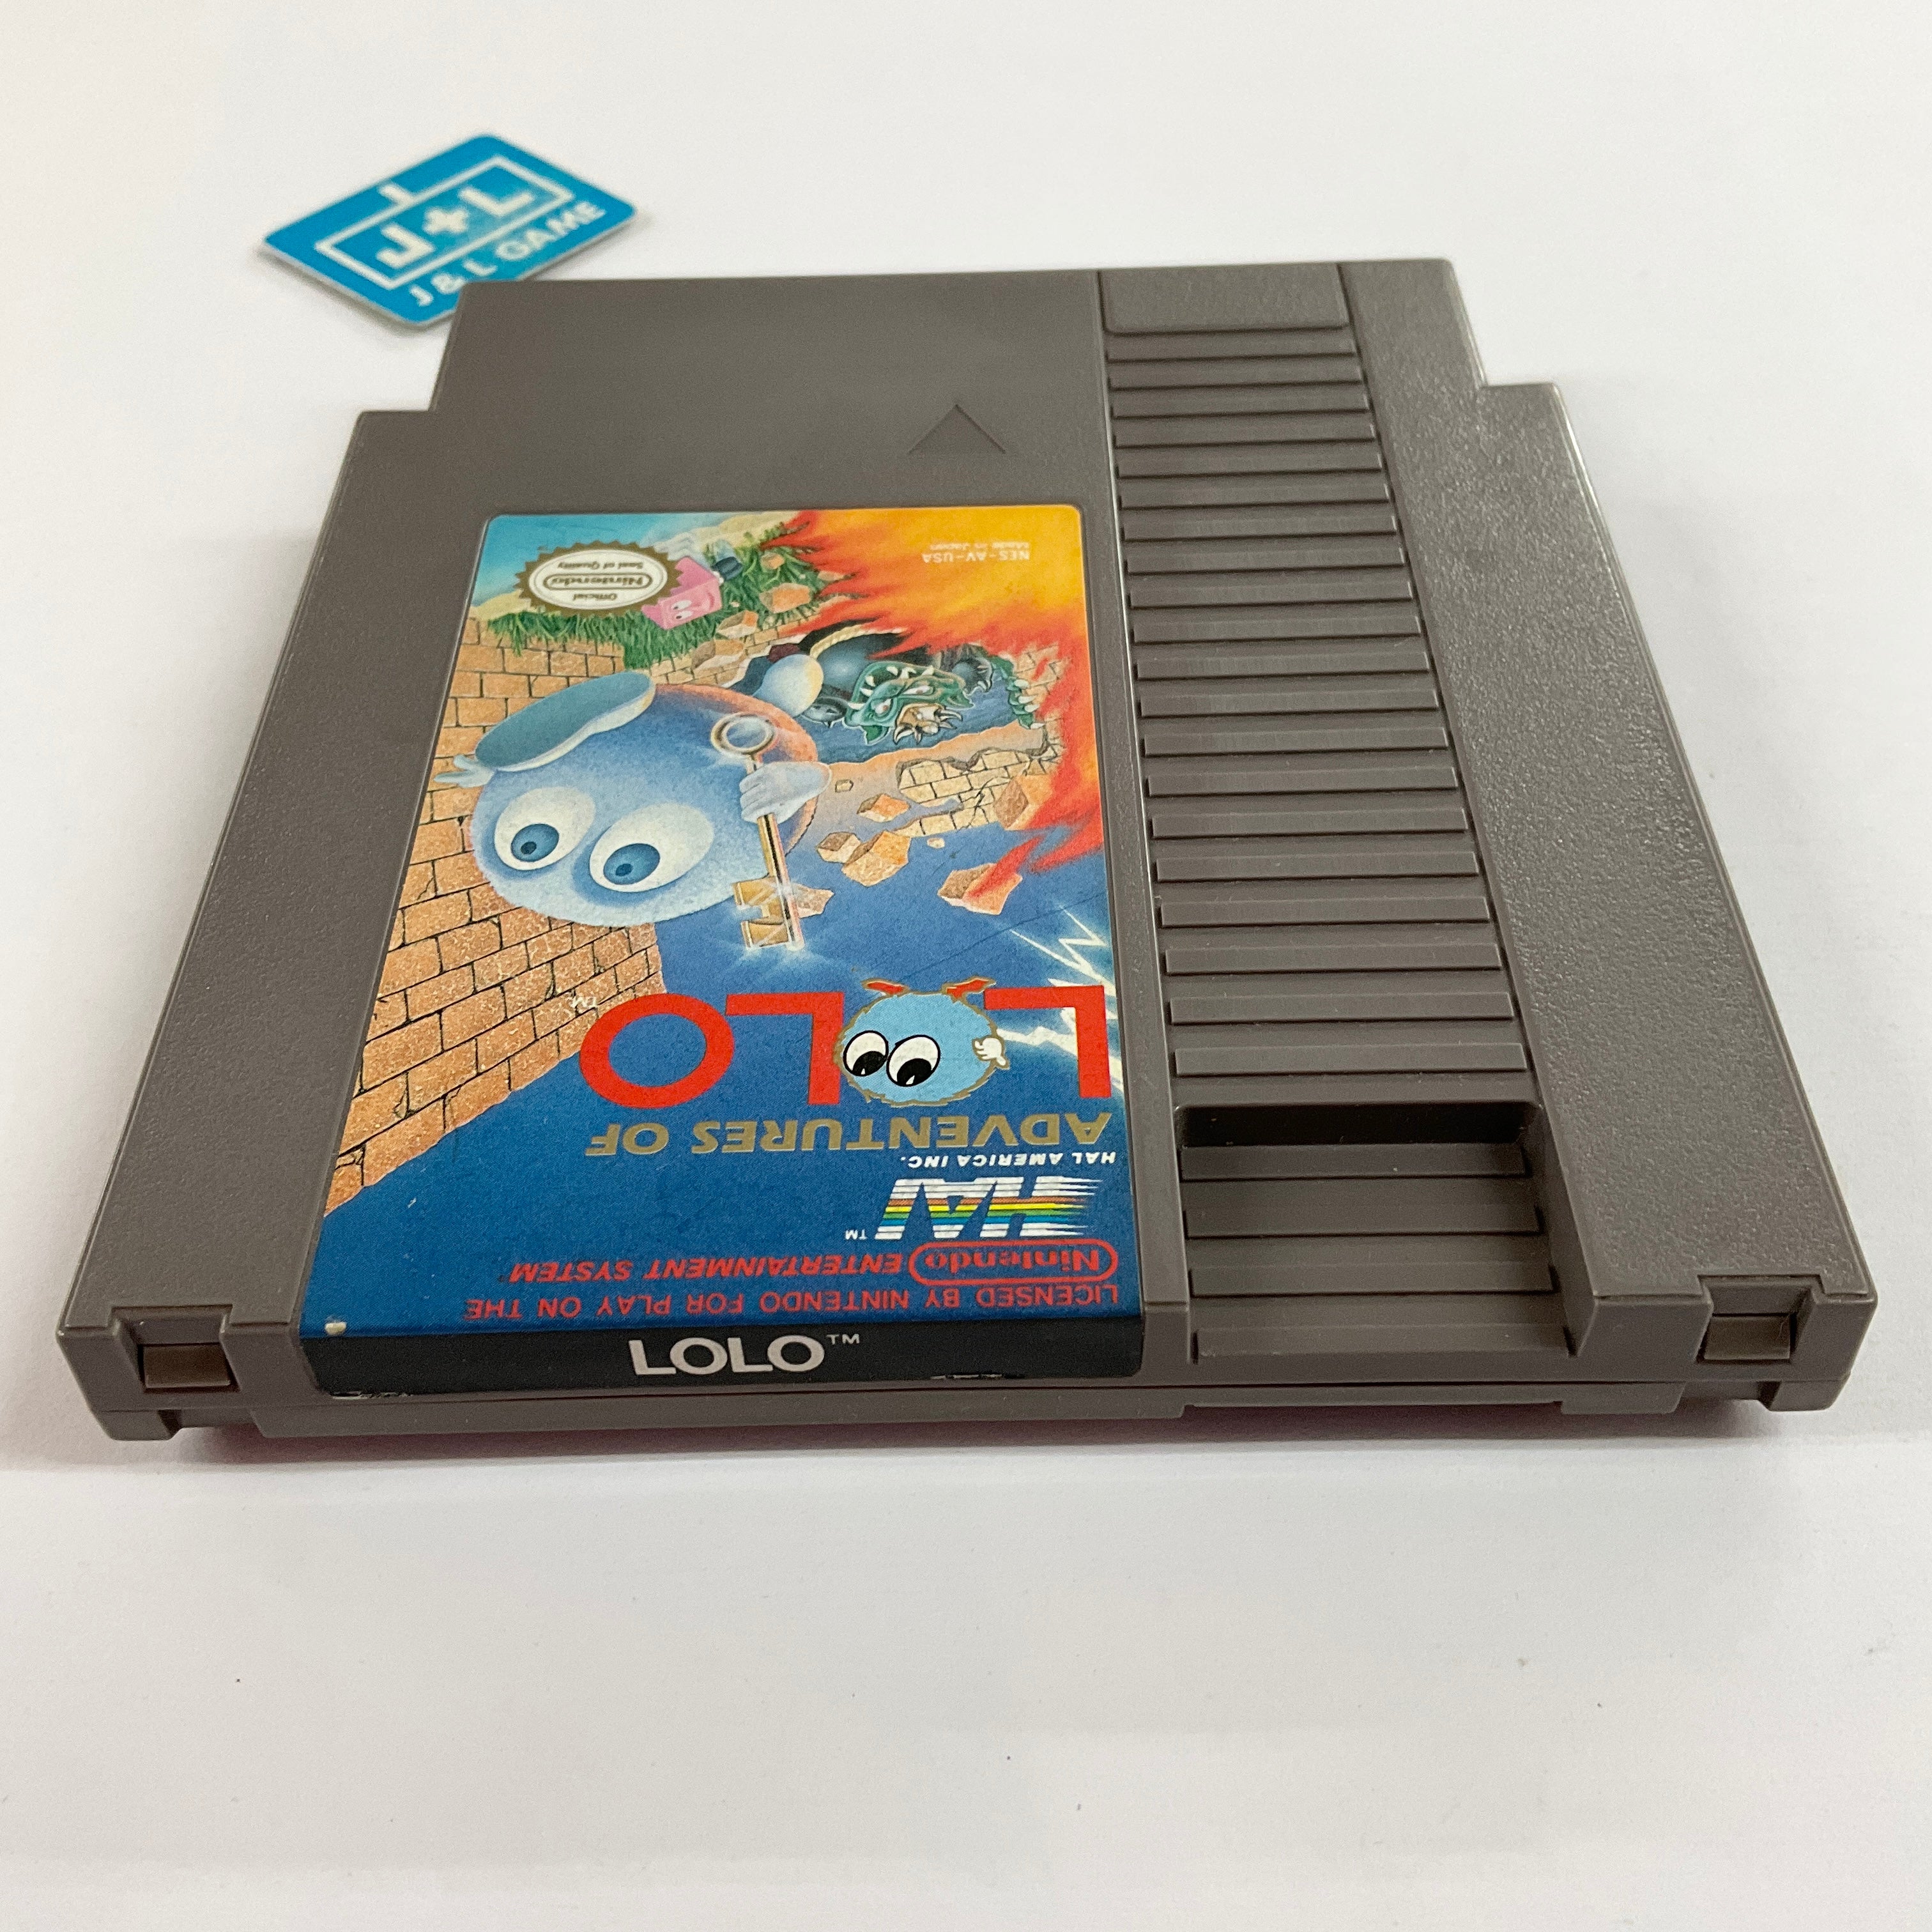 Adventures of Lolo - (NES) Nintendo Entertainment System [Pre-Owned] Video Games HAL Labs   